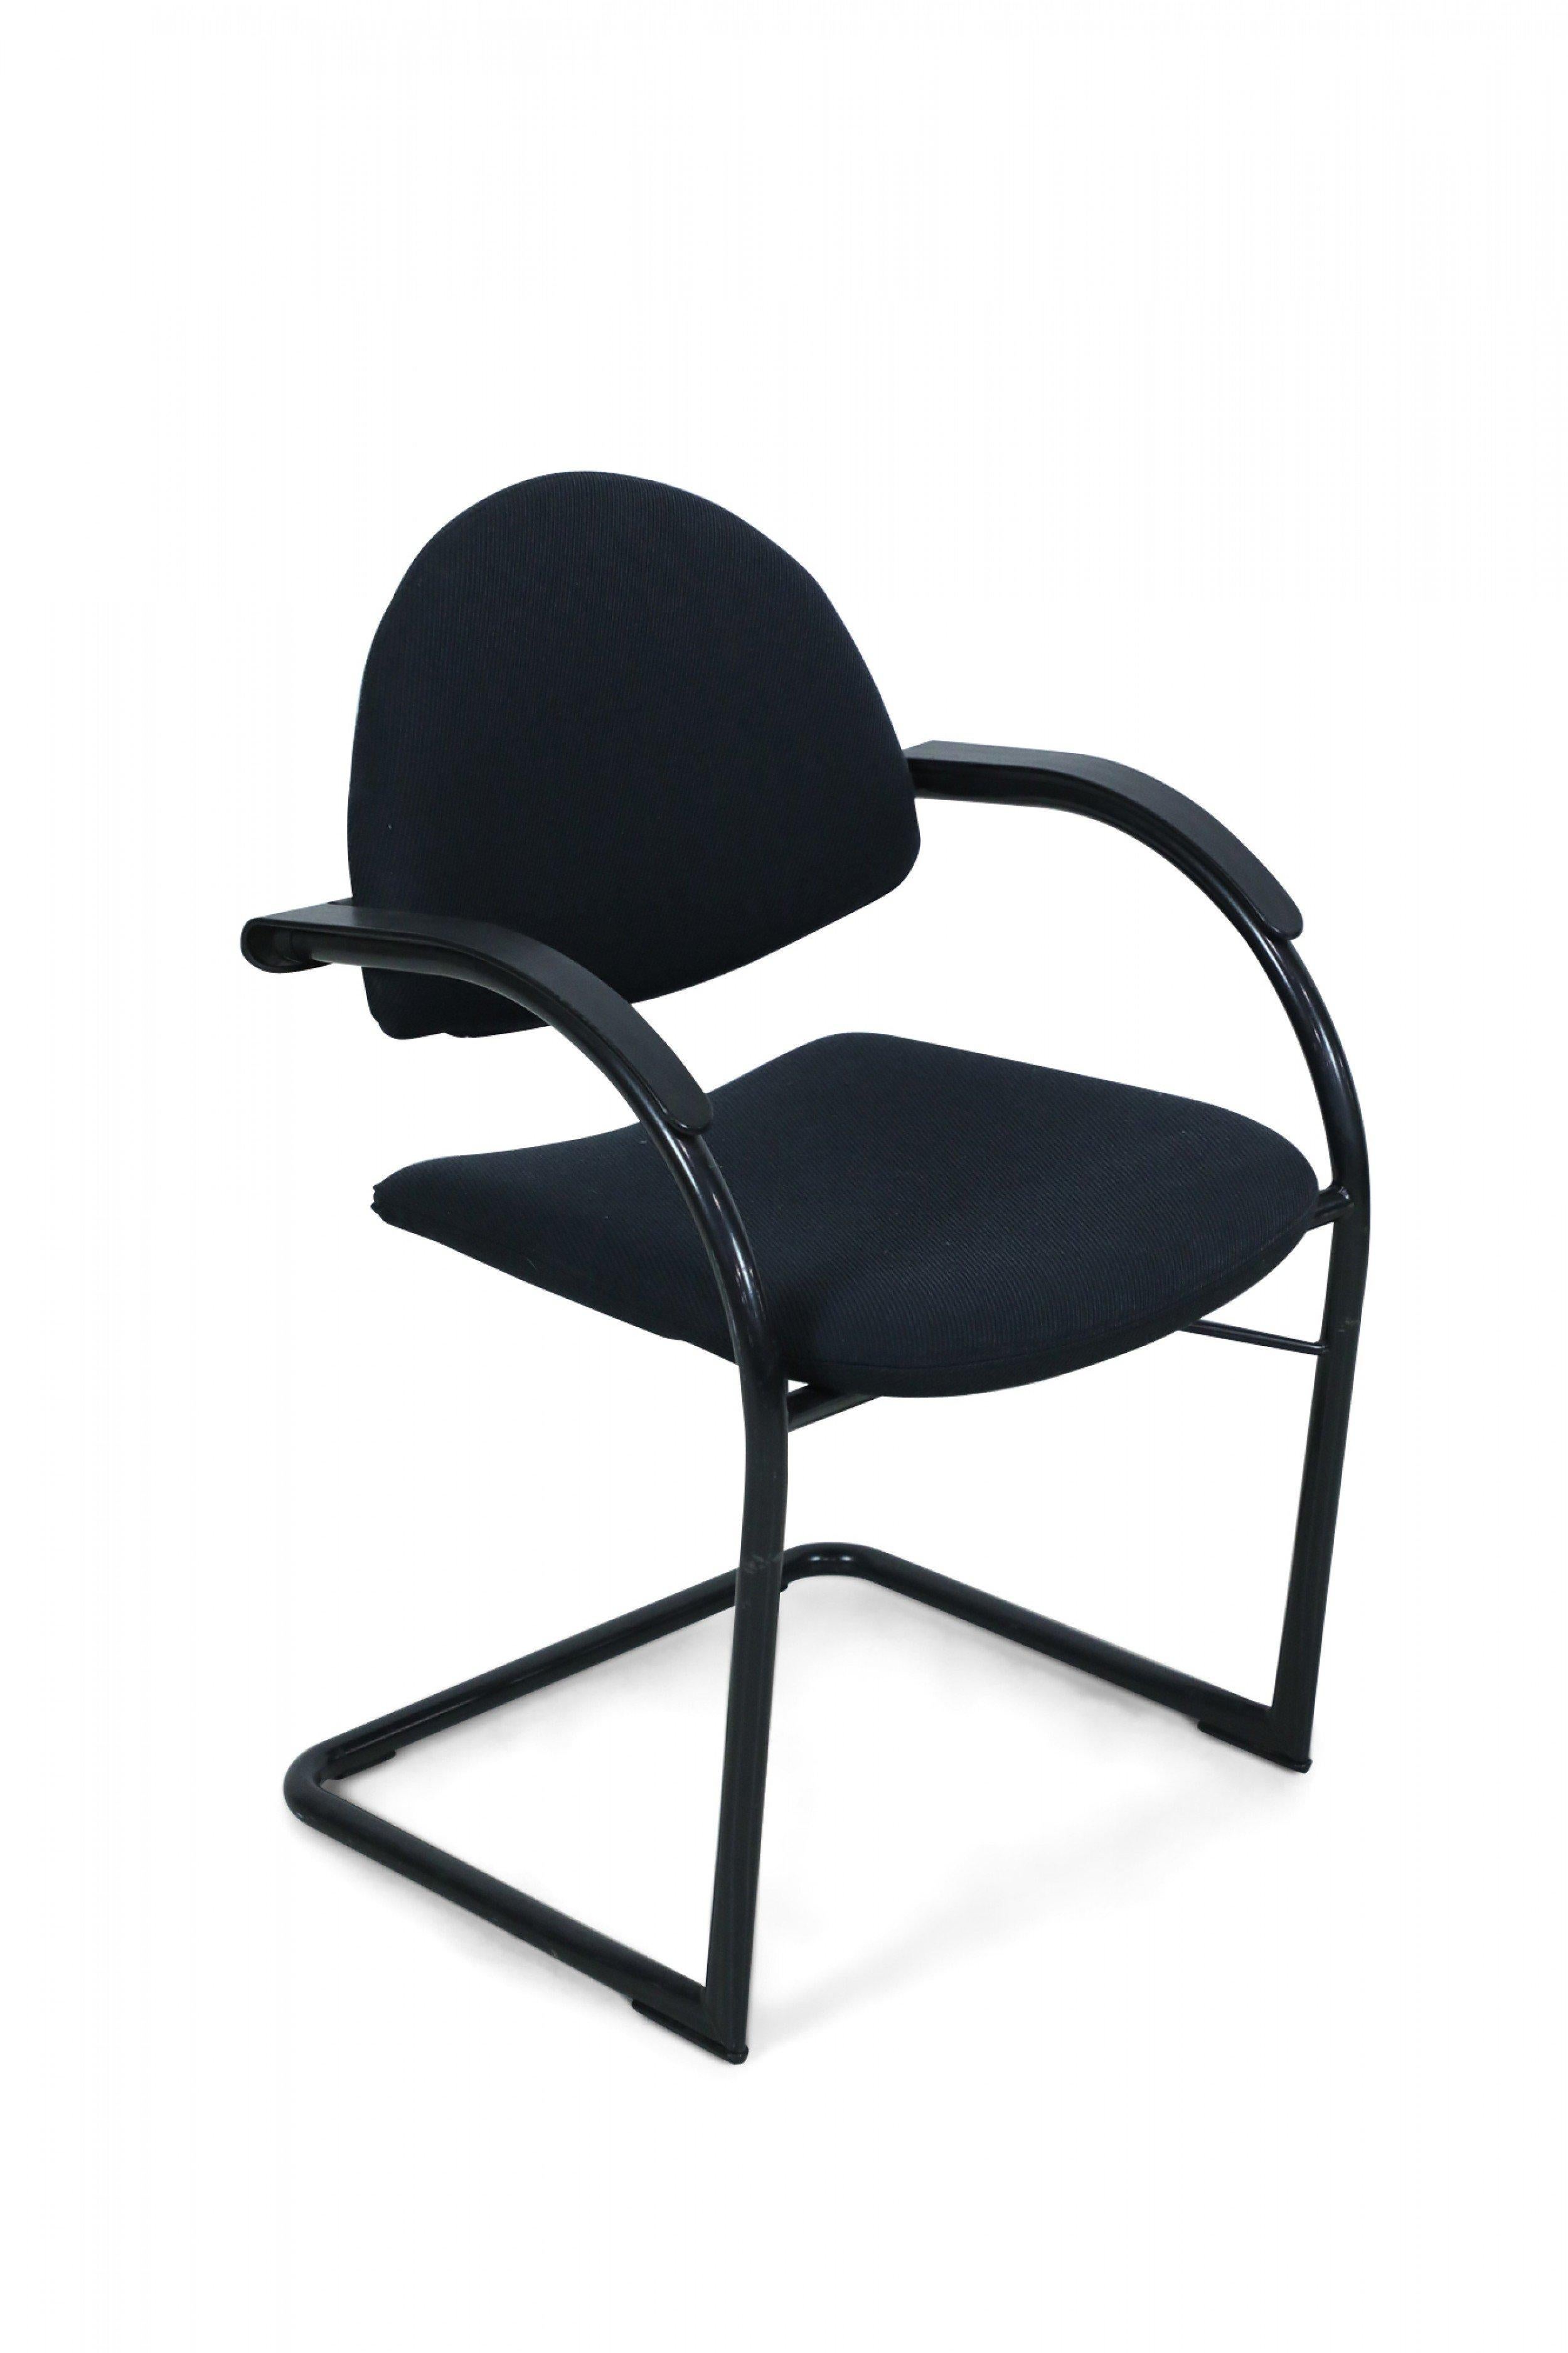 Contemporary black plastic and fabric upholstered office chair with adjustable back rest, curved arms, and stretcher base (VITRA for Mario Bellini).
      